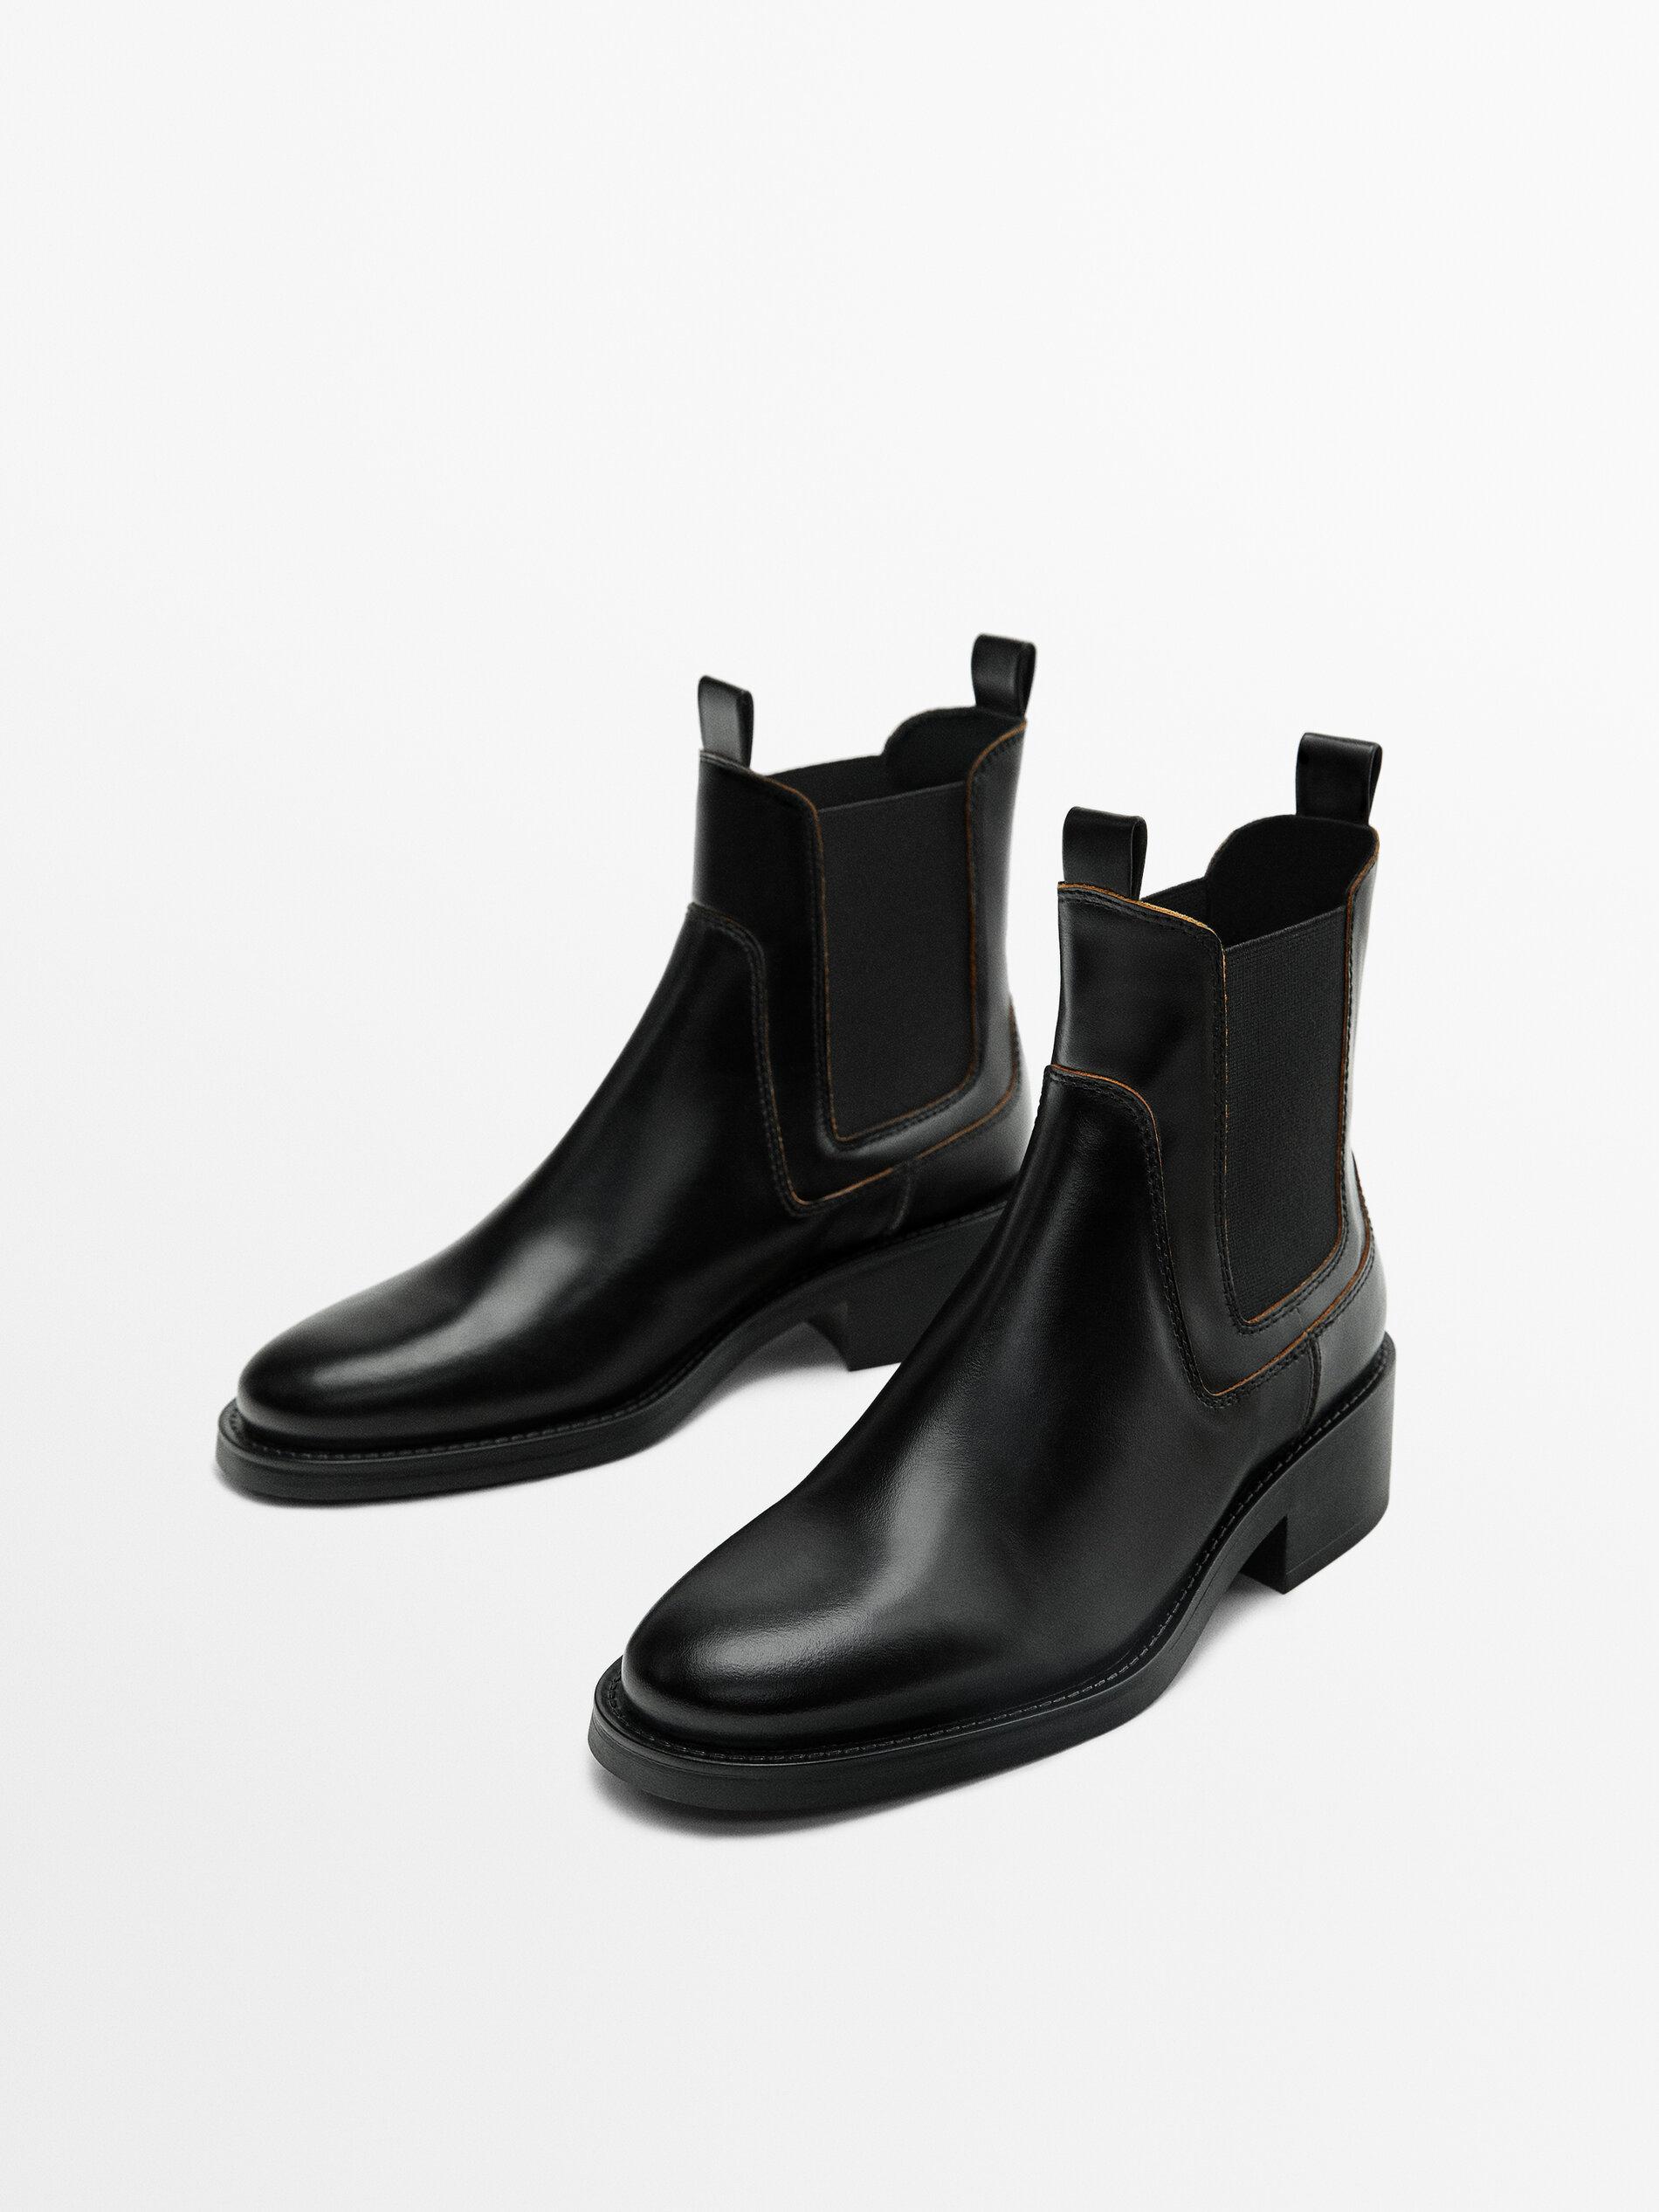 MASSIMO DUTTI Chelsea Boots With Contrast Edges in Black | Lyst